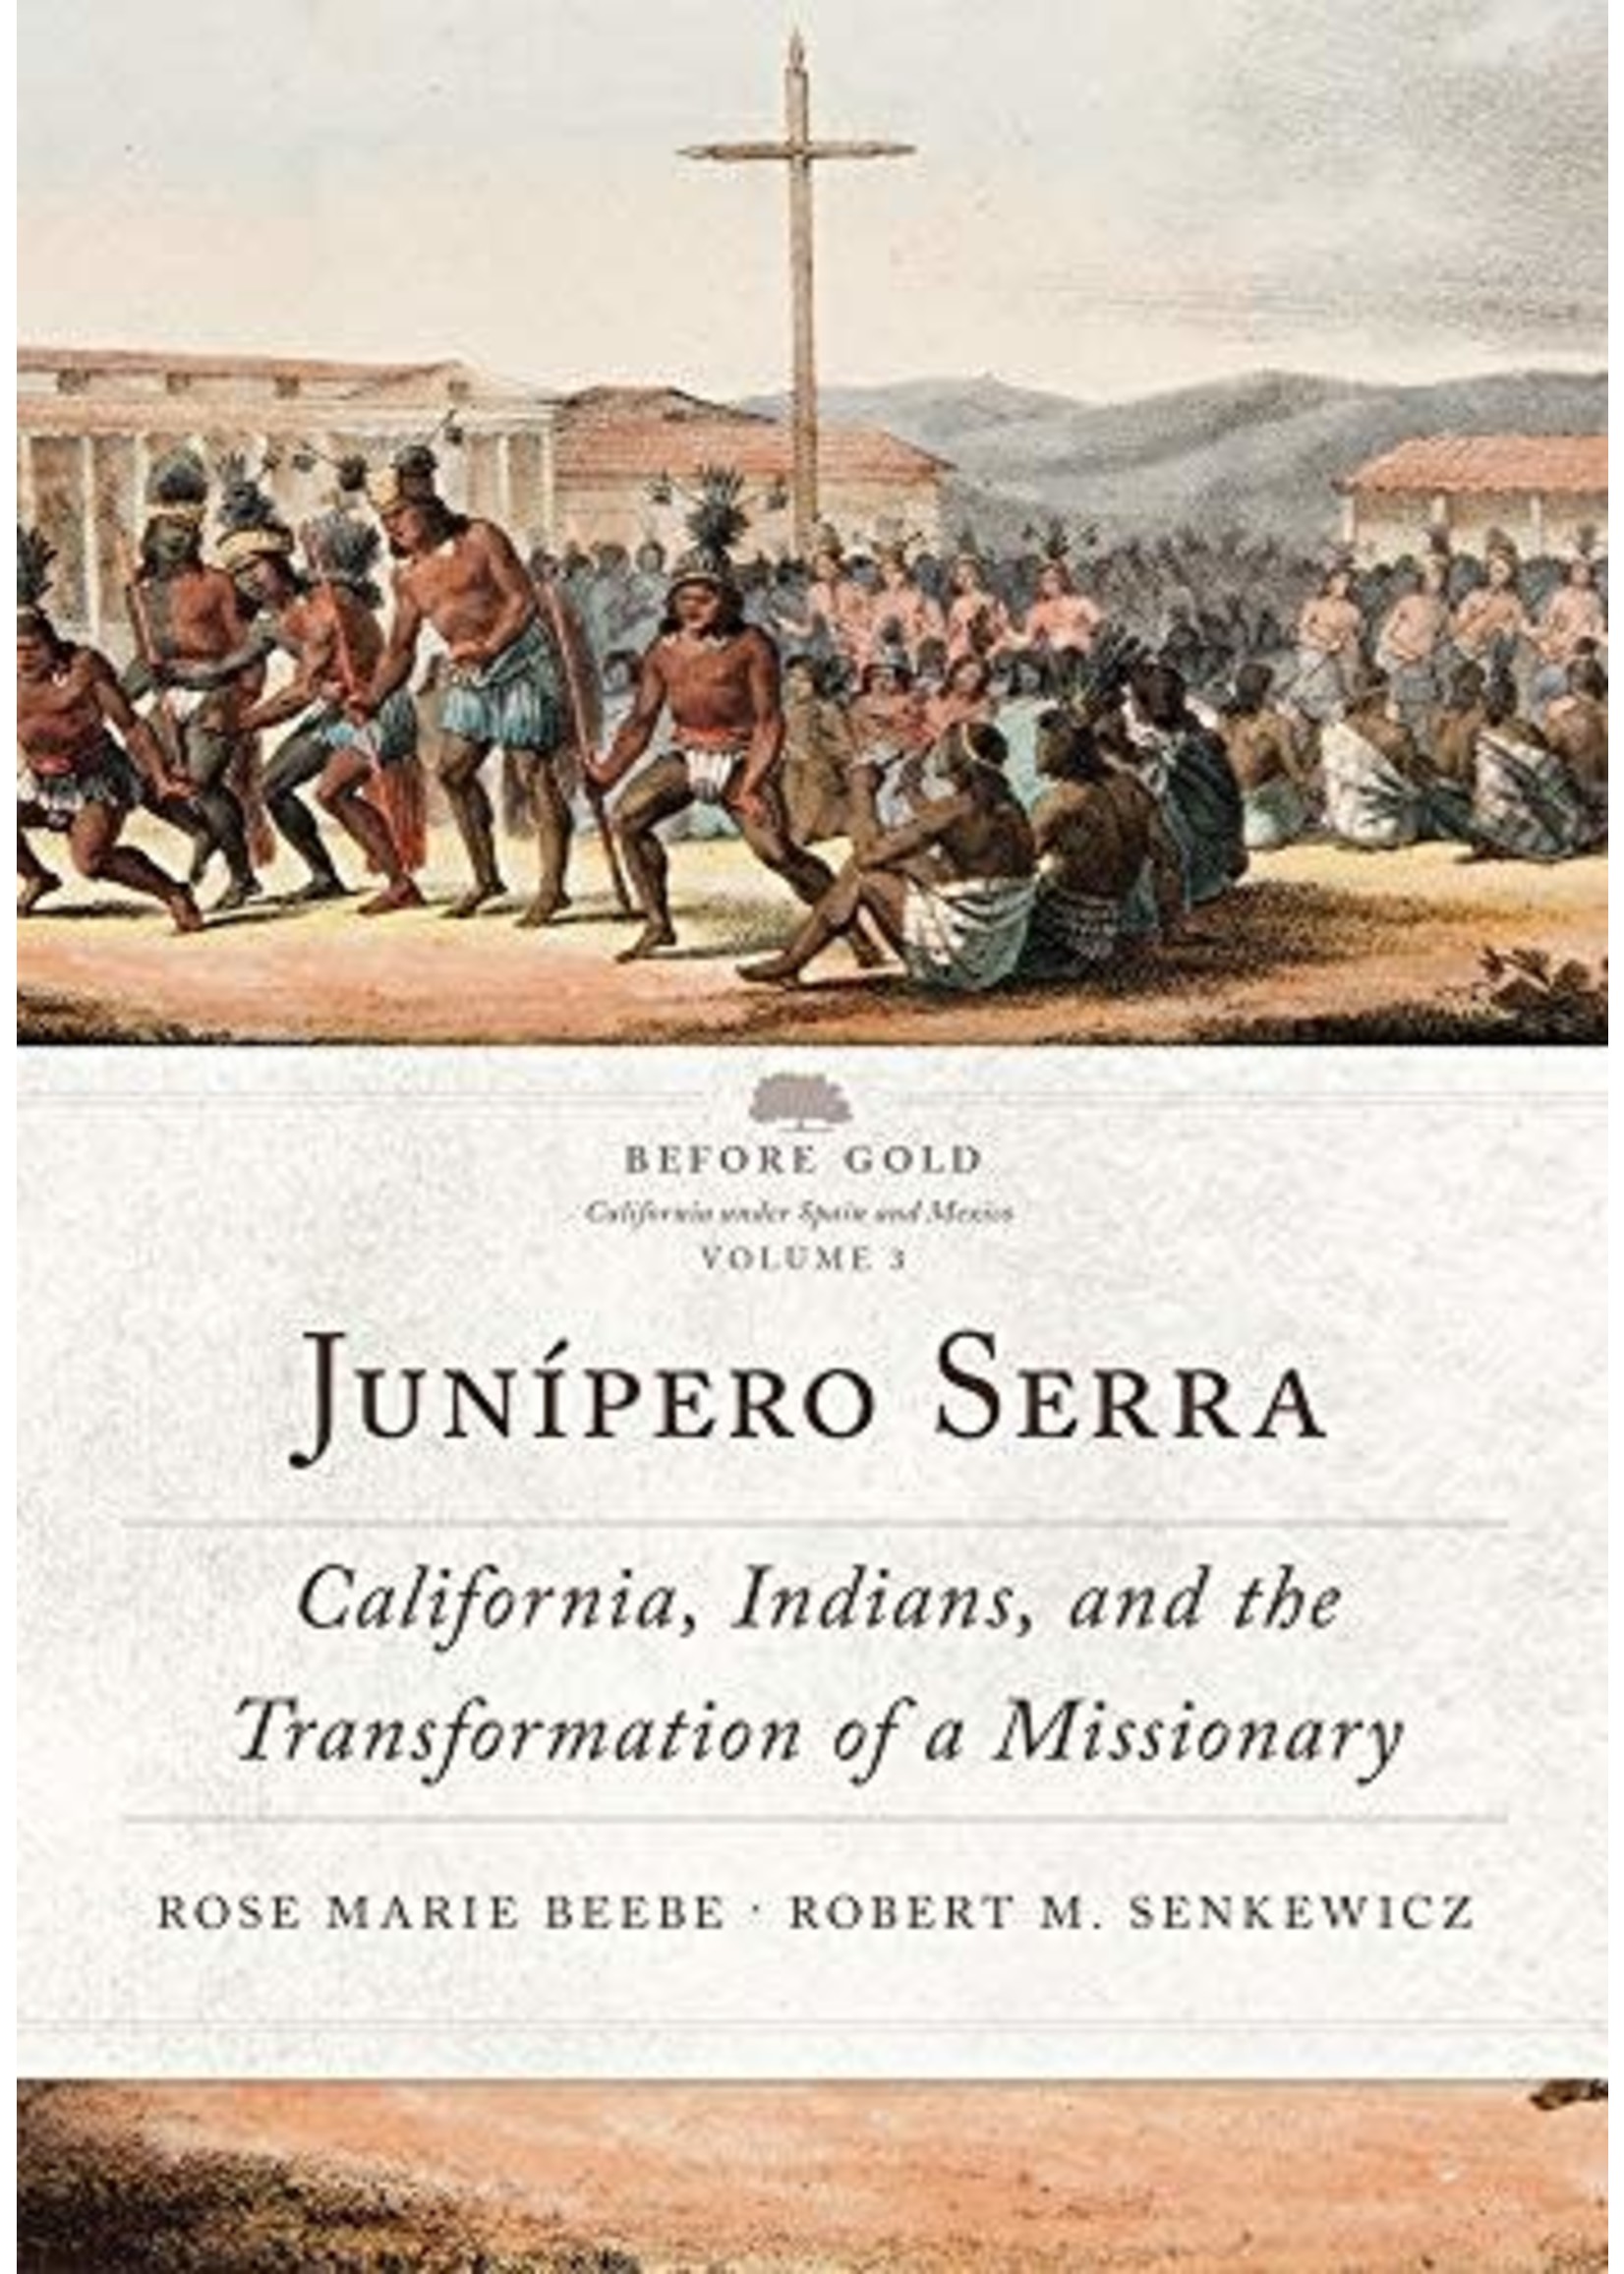 Junipero Serra: California, Indians, and the Transformation of a Missionary